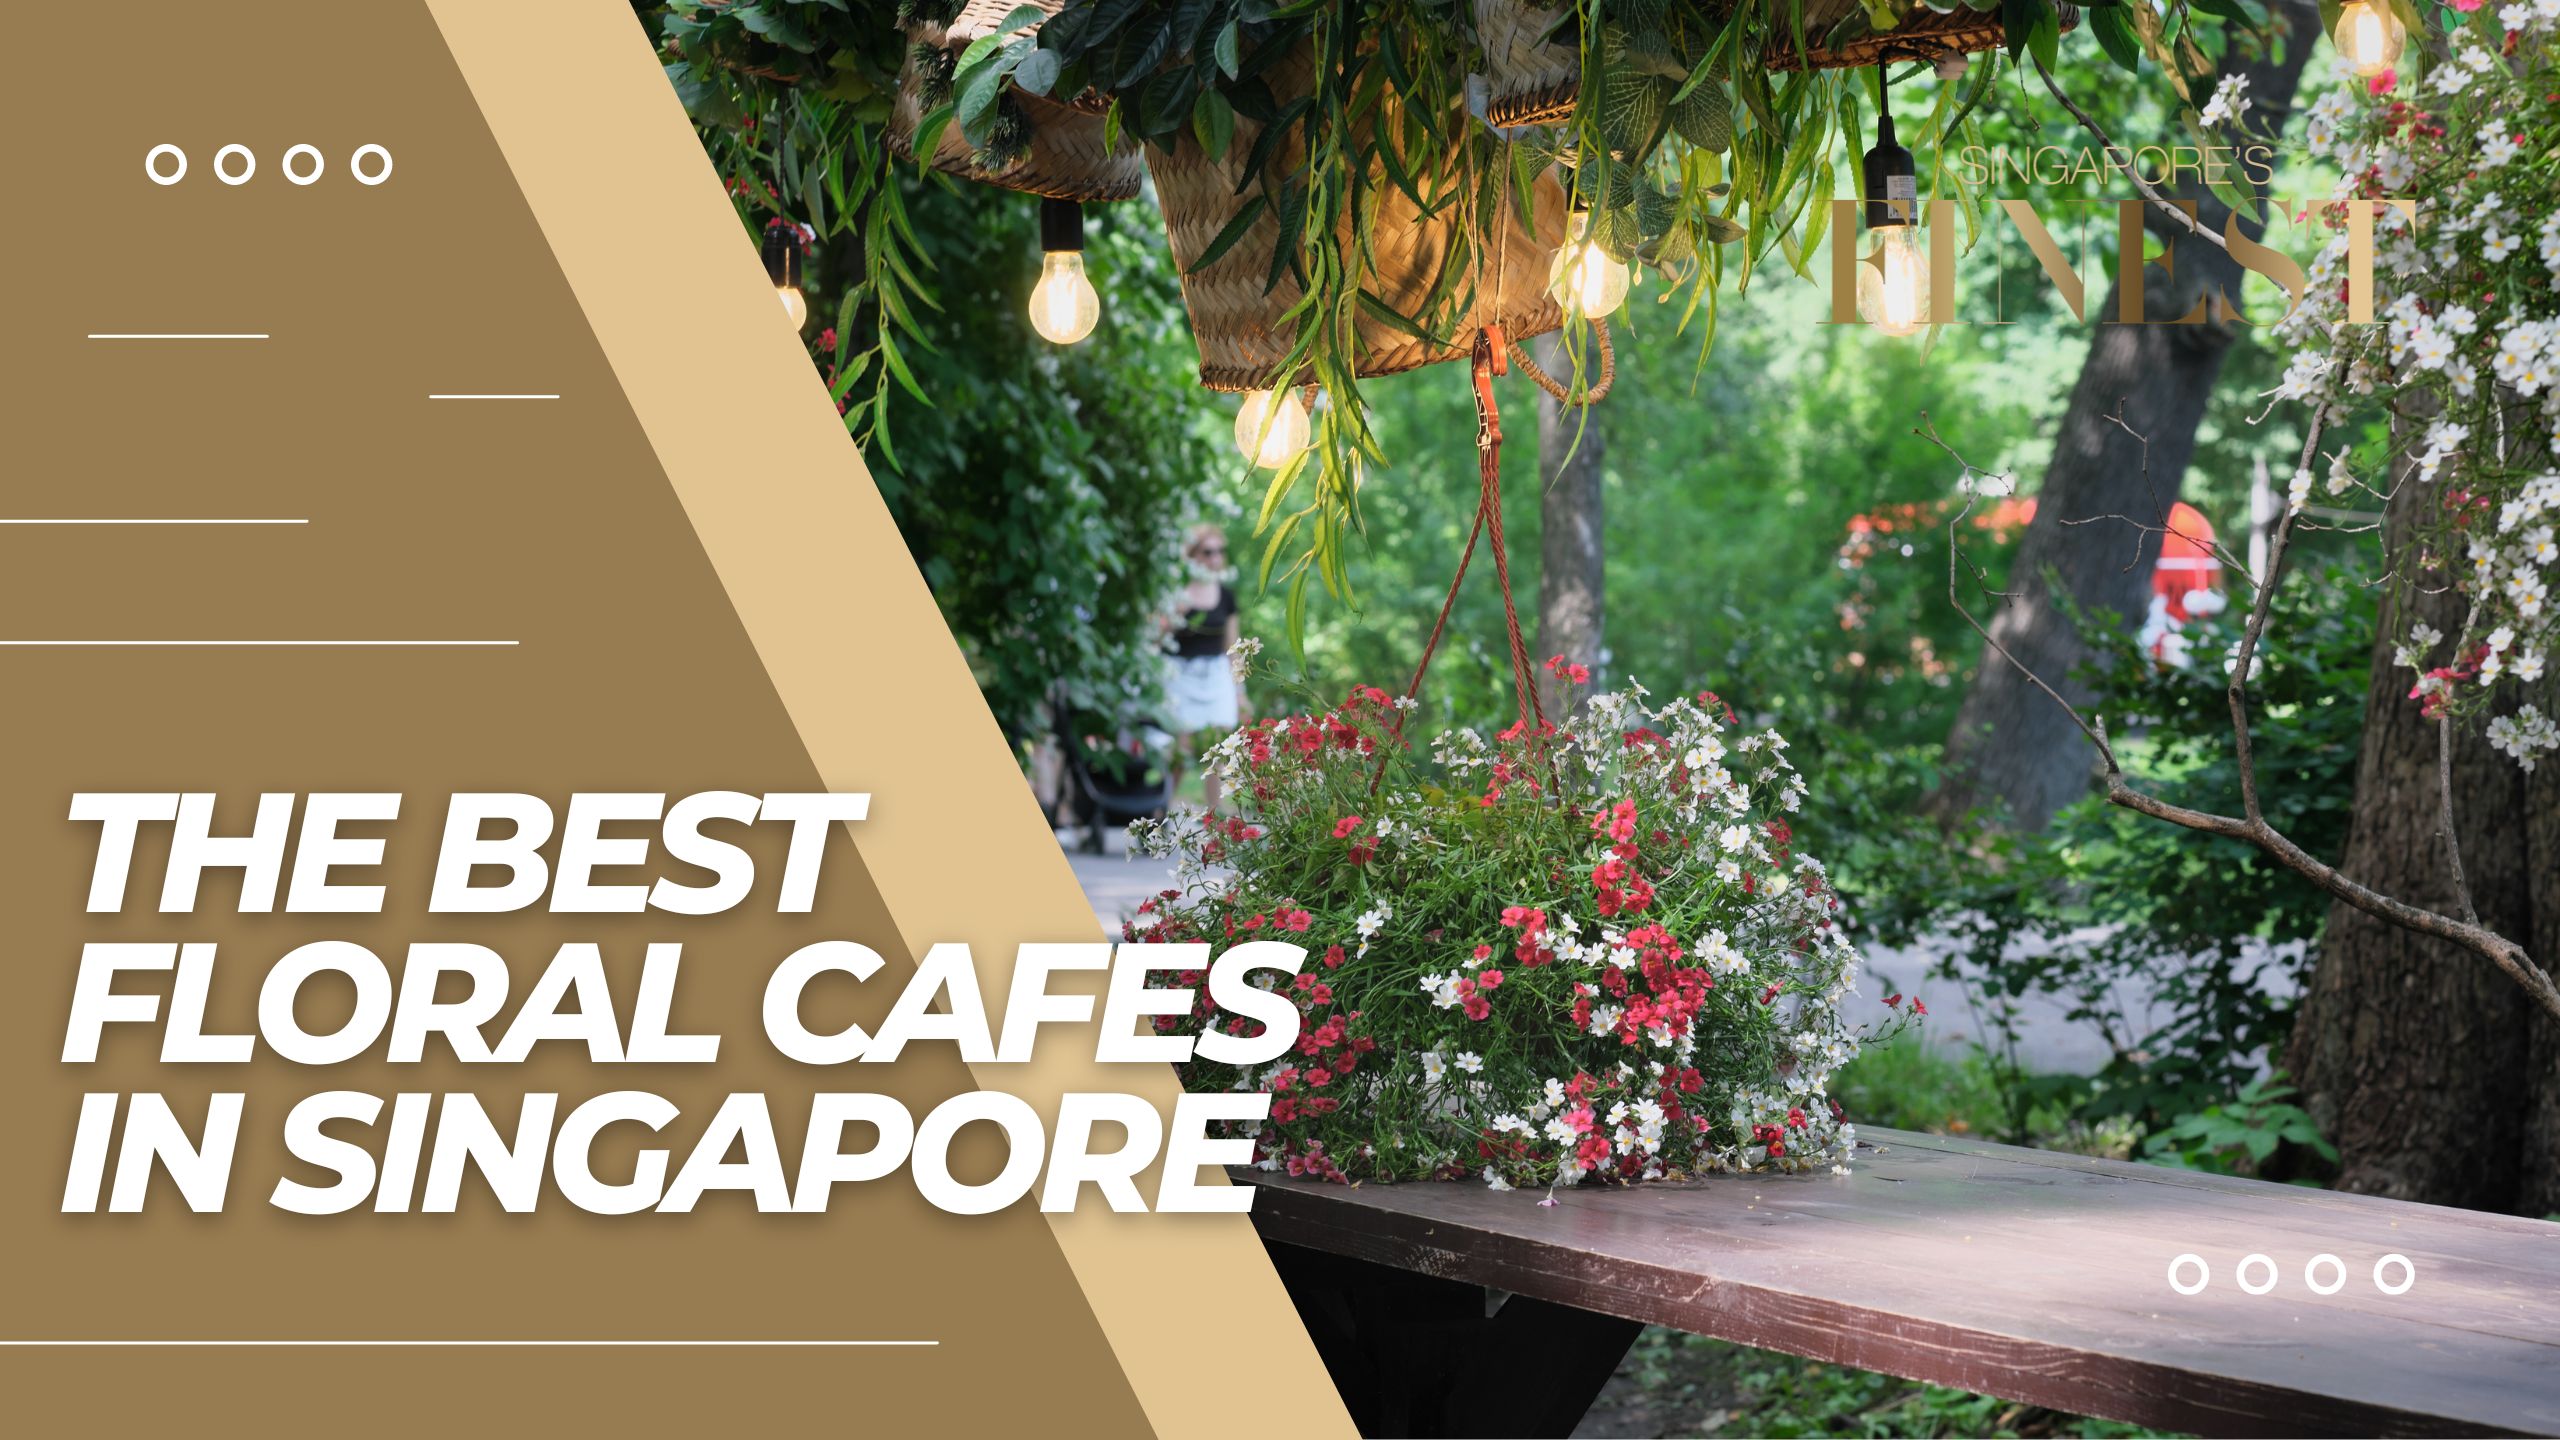 10 Best Floral Cafes in Singapore